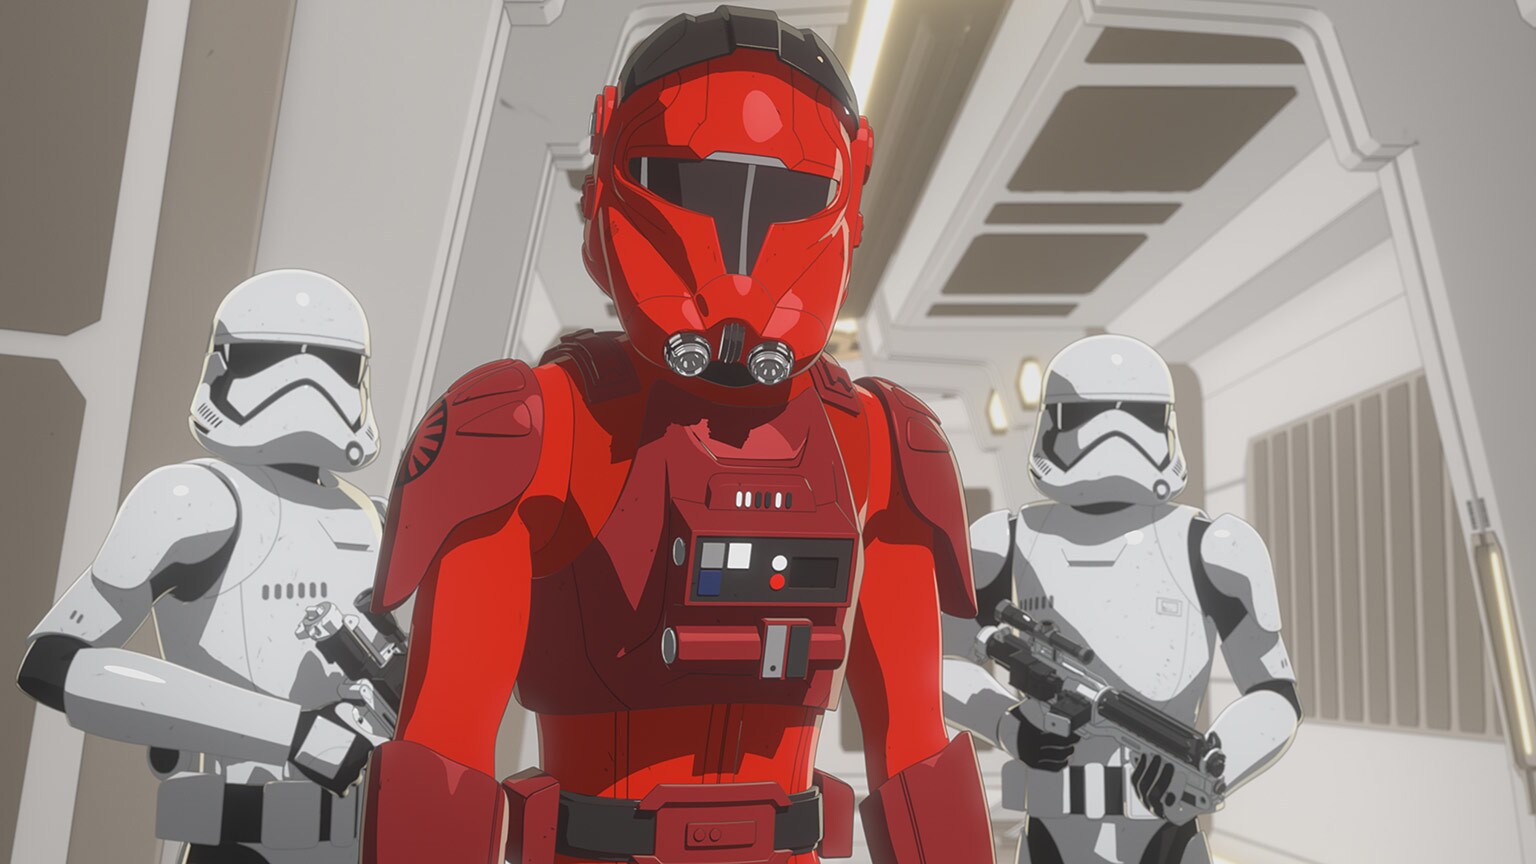 Bucket's List Extra: 9 Fun Facts from "The High Tower" - Star Wars Resistance